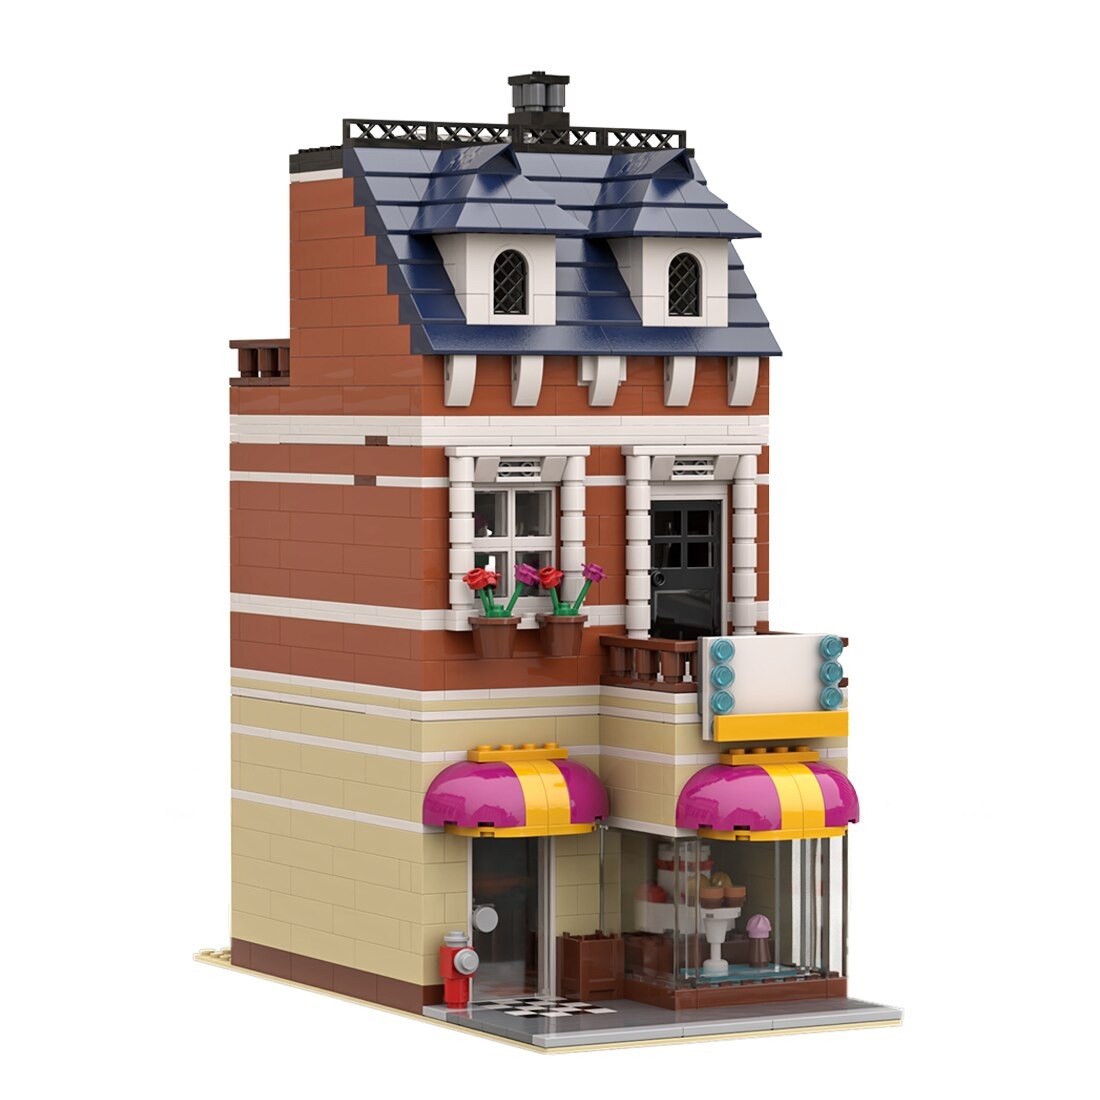 The Bakery MOC-42207 Modular Buildings With 1327 Pieces